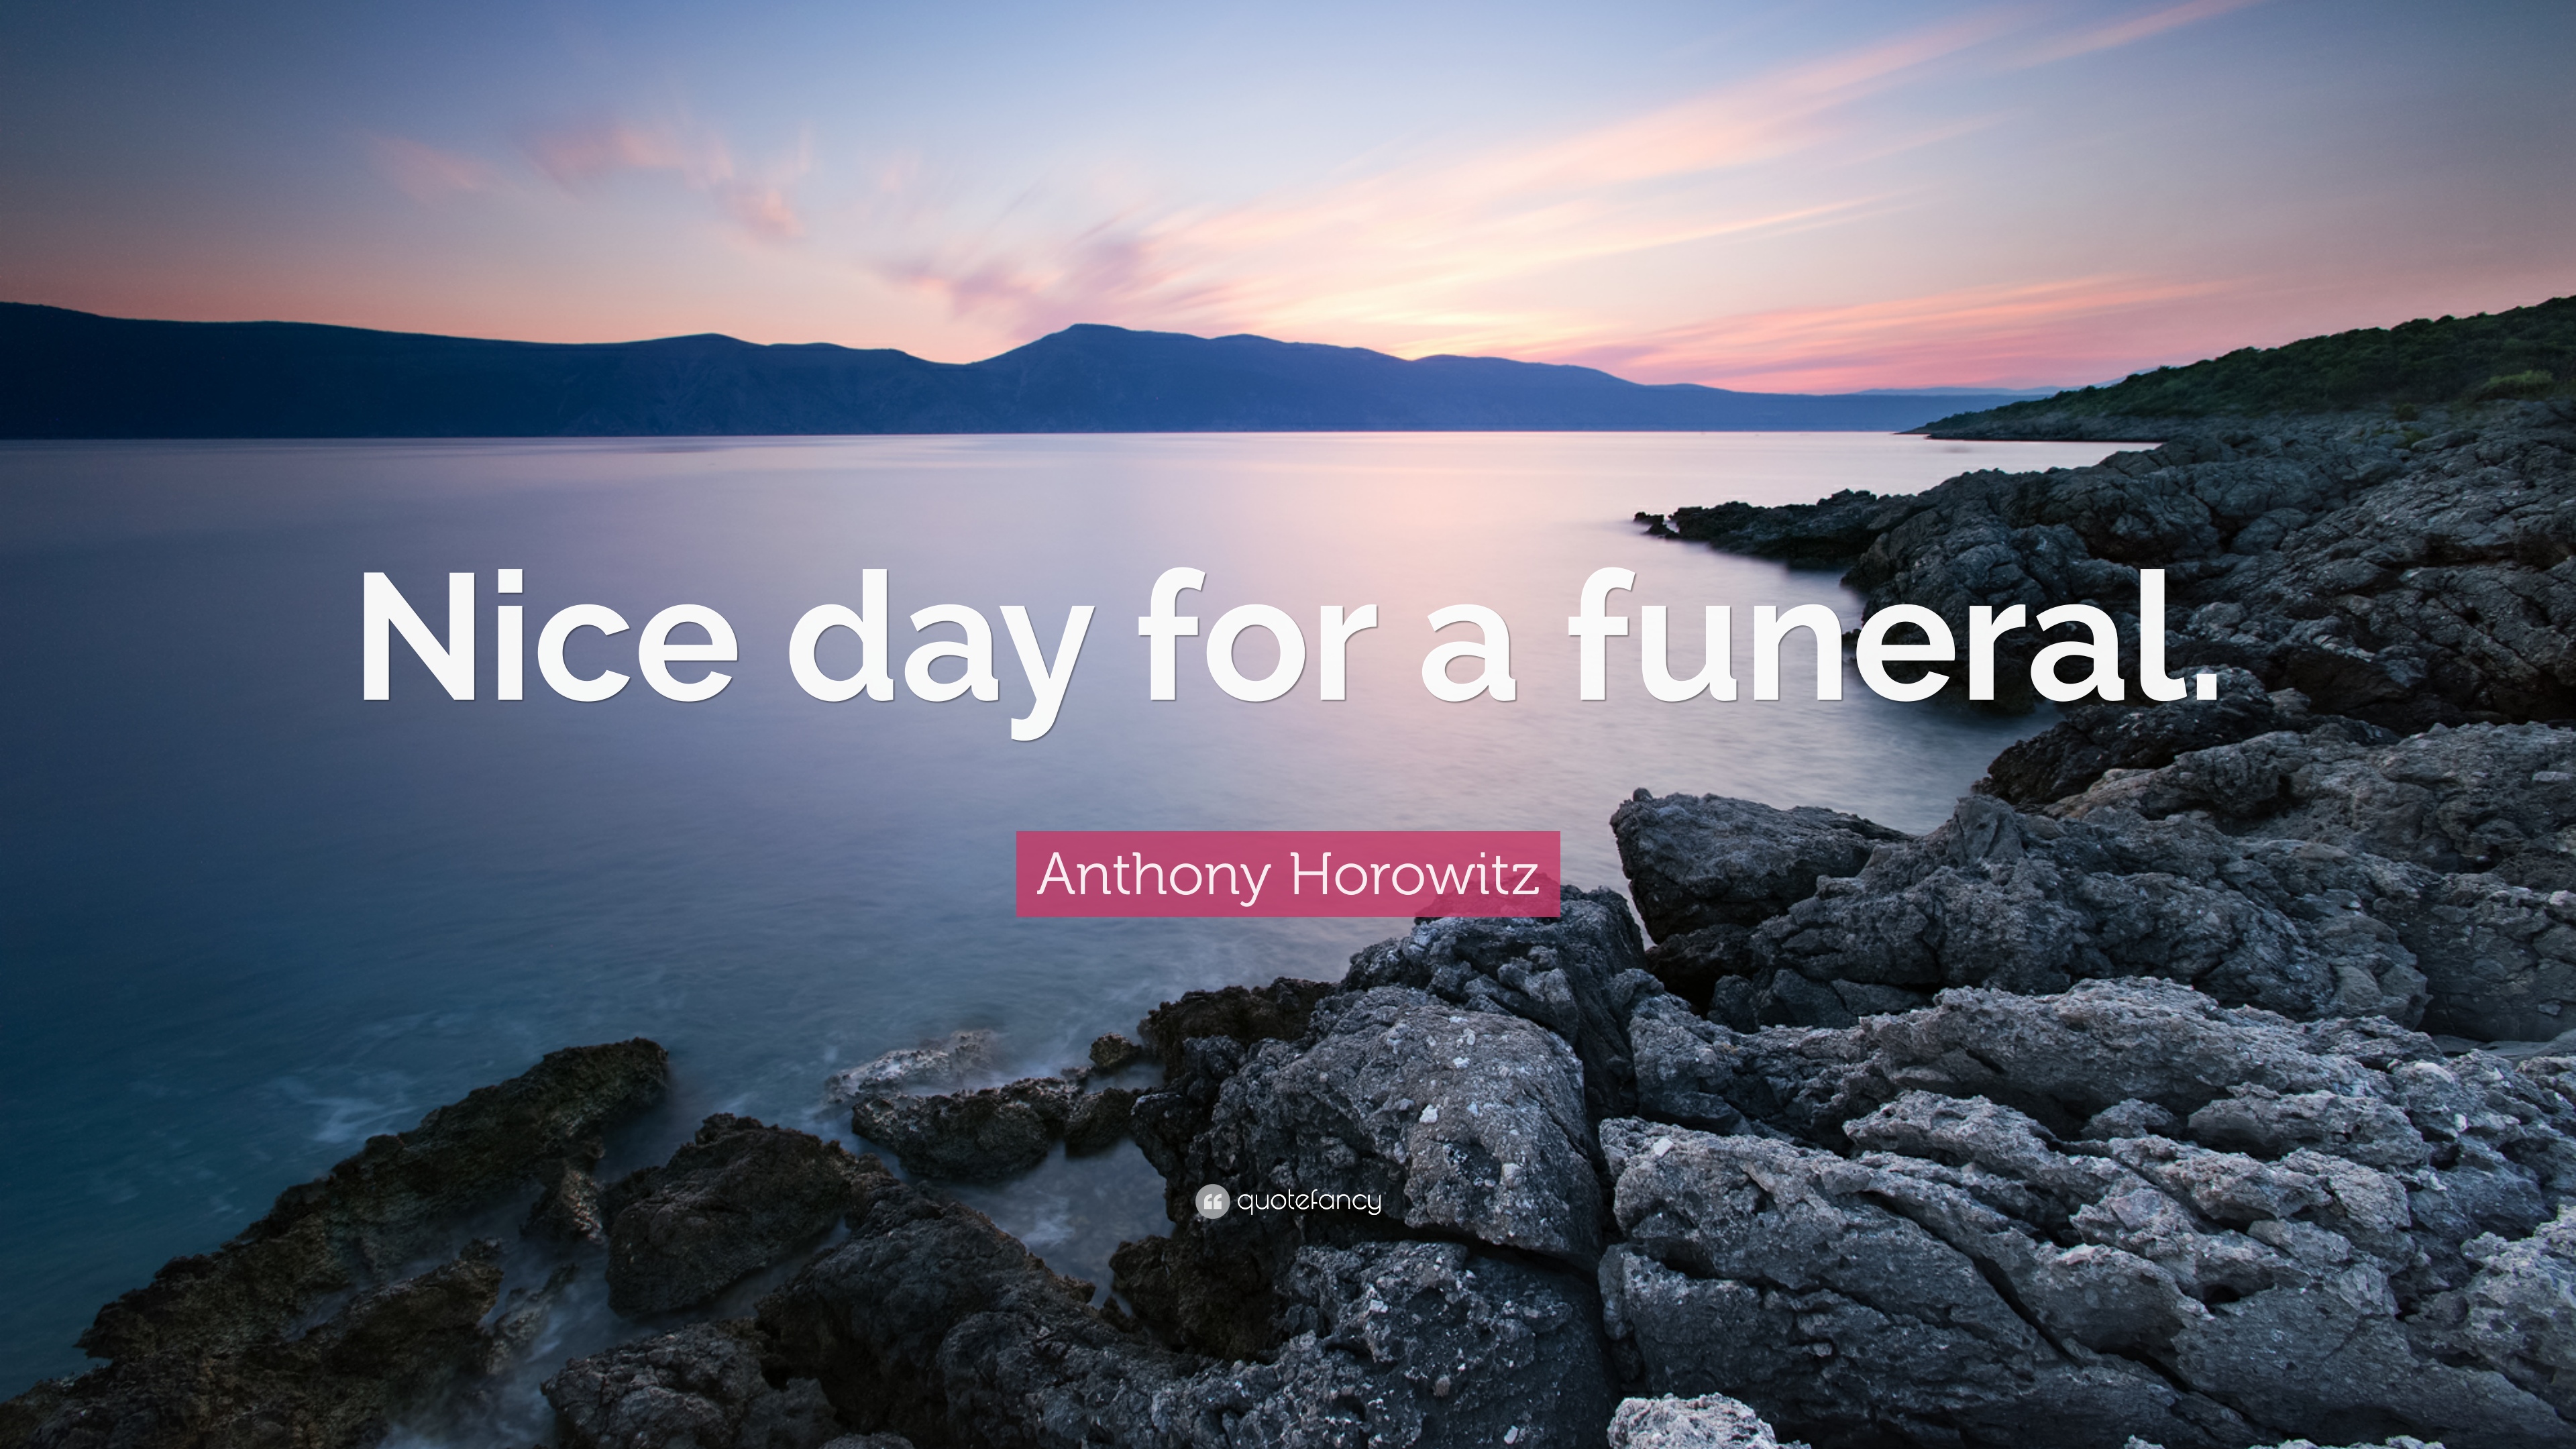 Anthony Horowitz Quote: “Nice day for a funeral.” 7 wallpaper